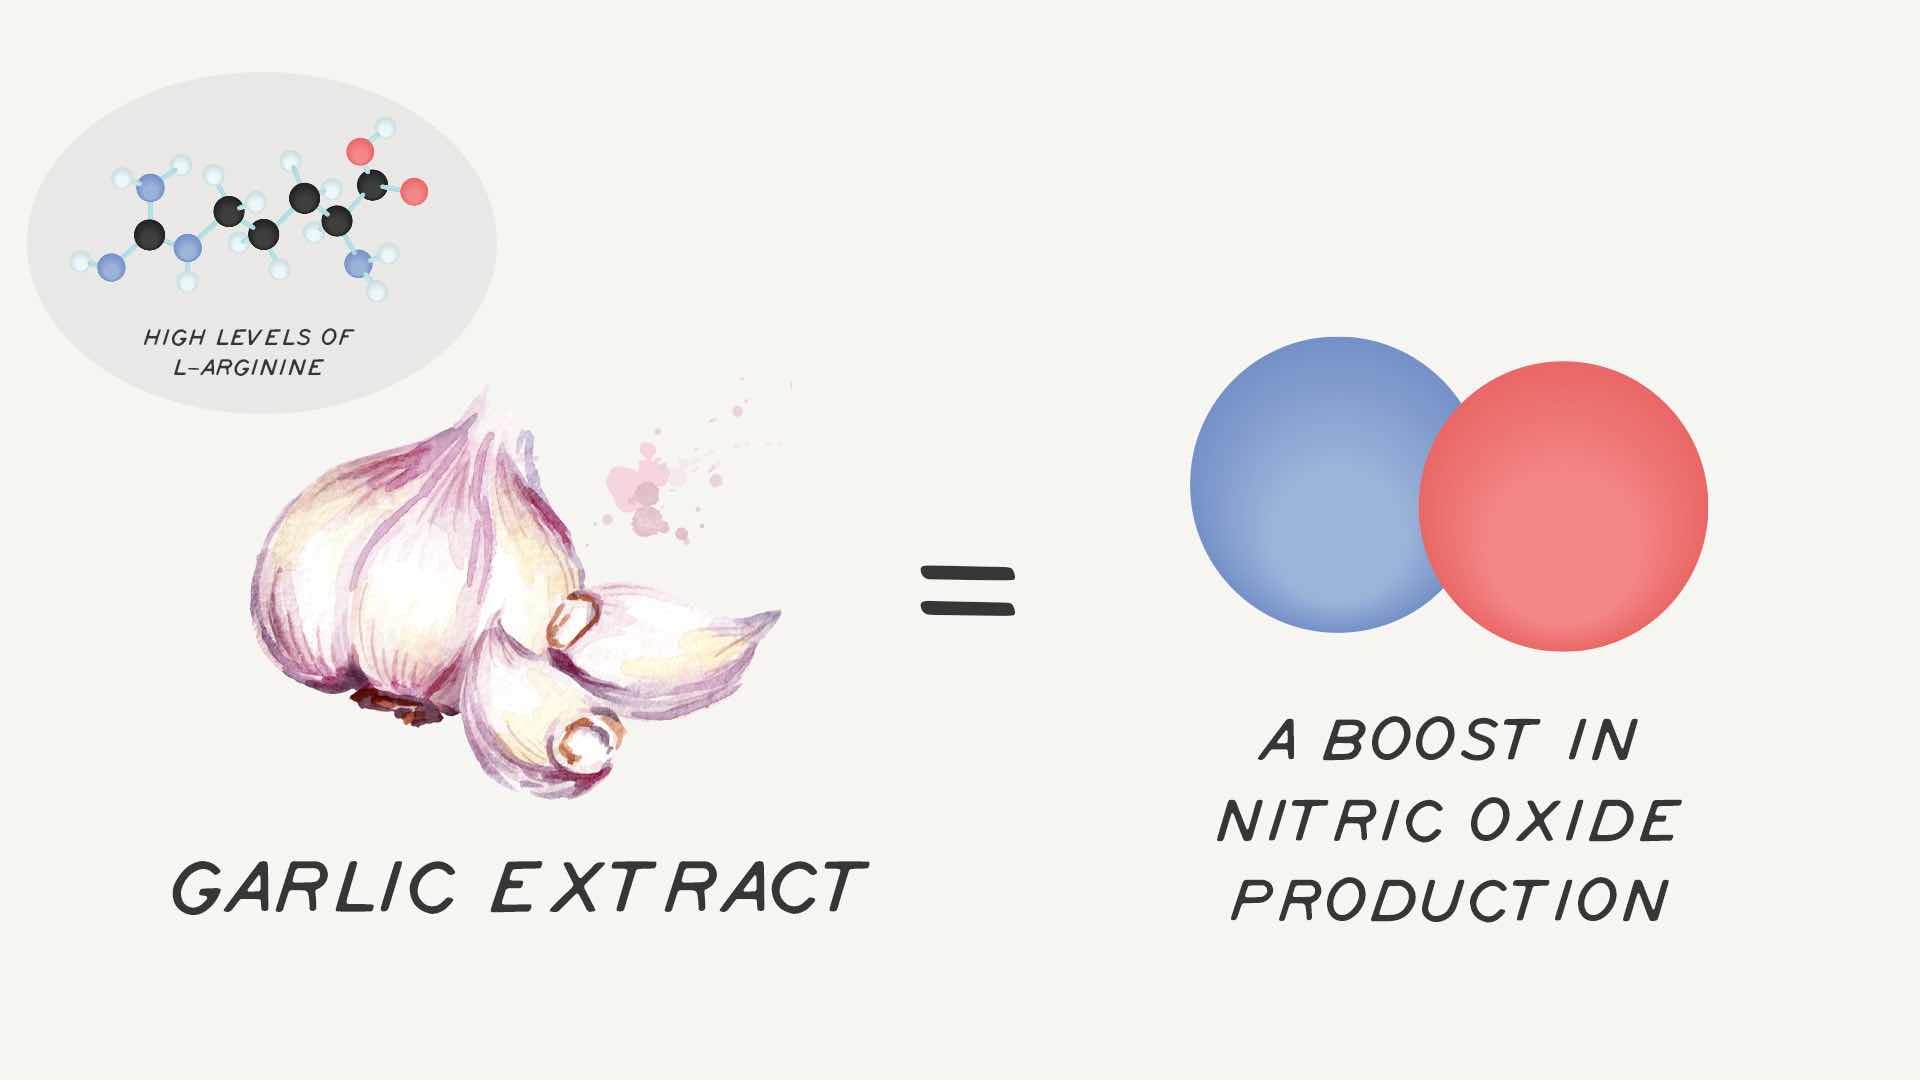 Garlic extract and blood flow